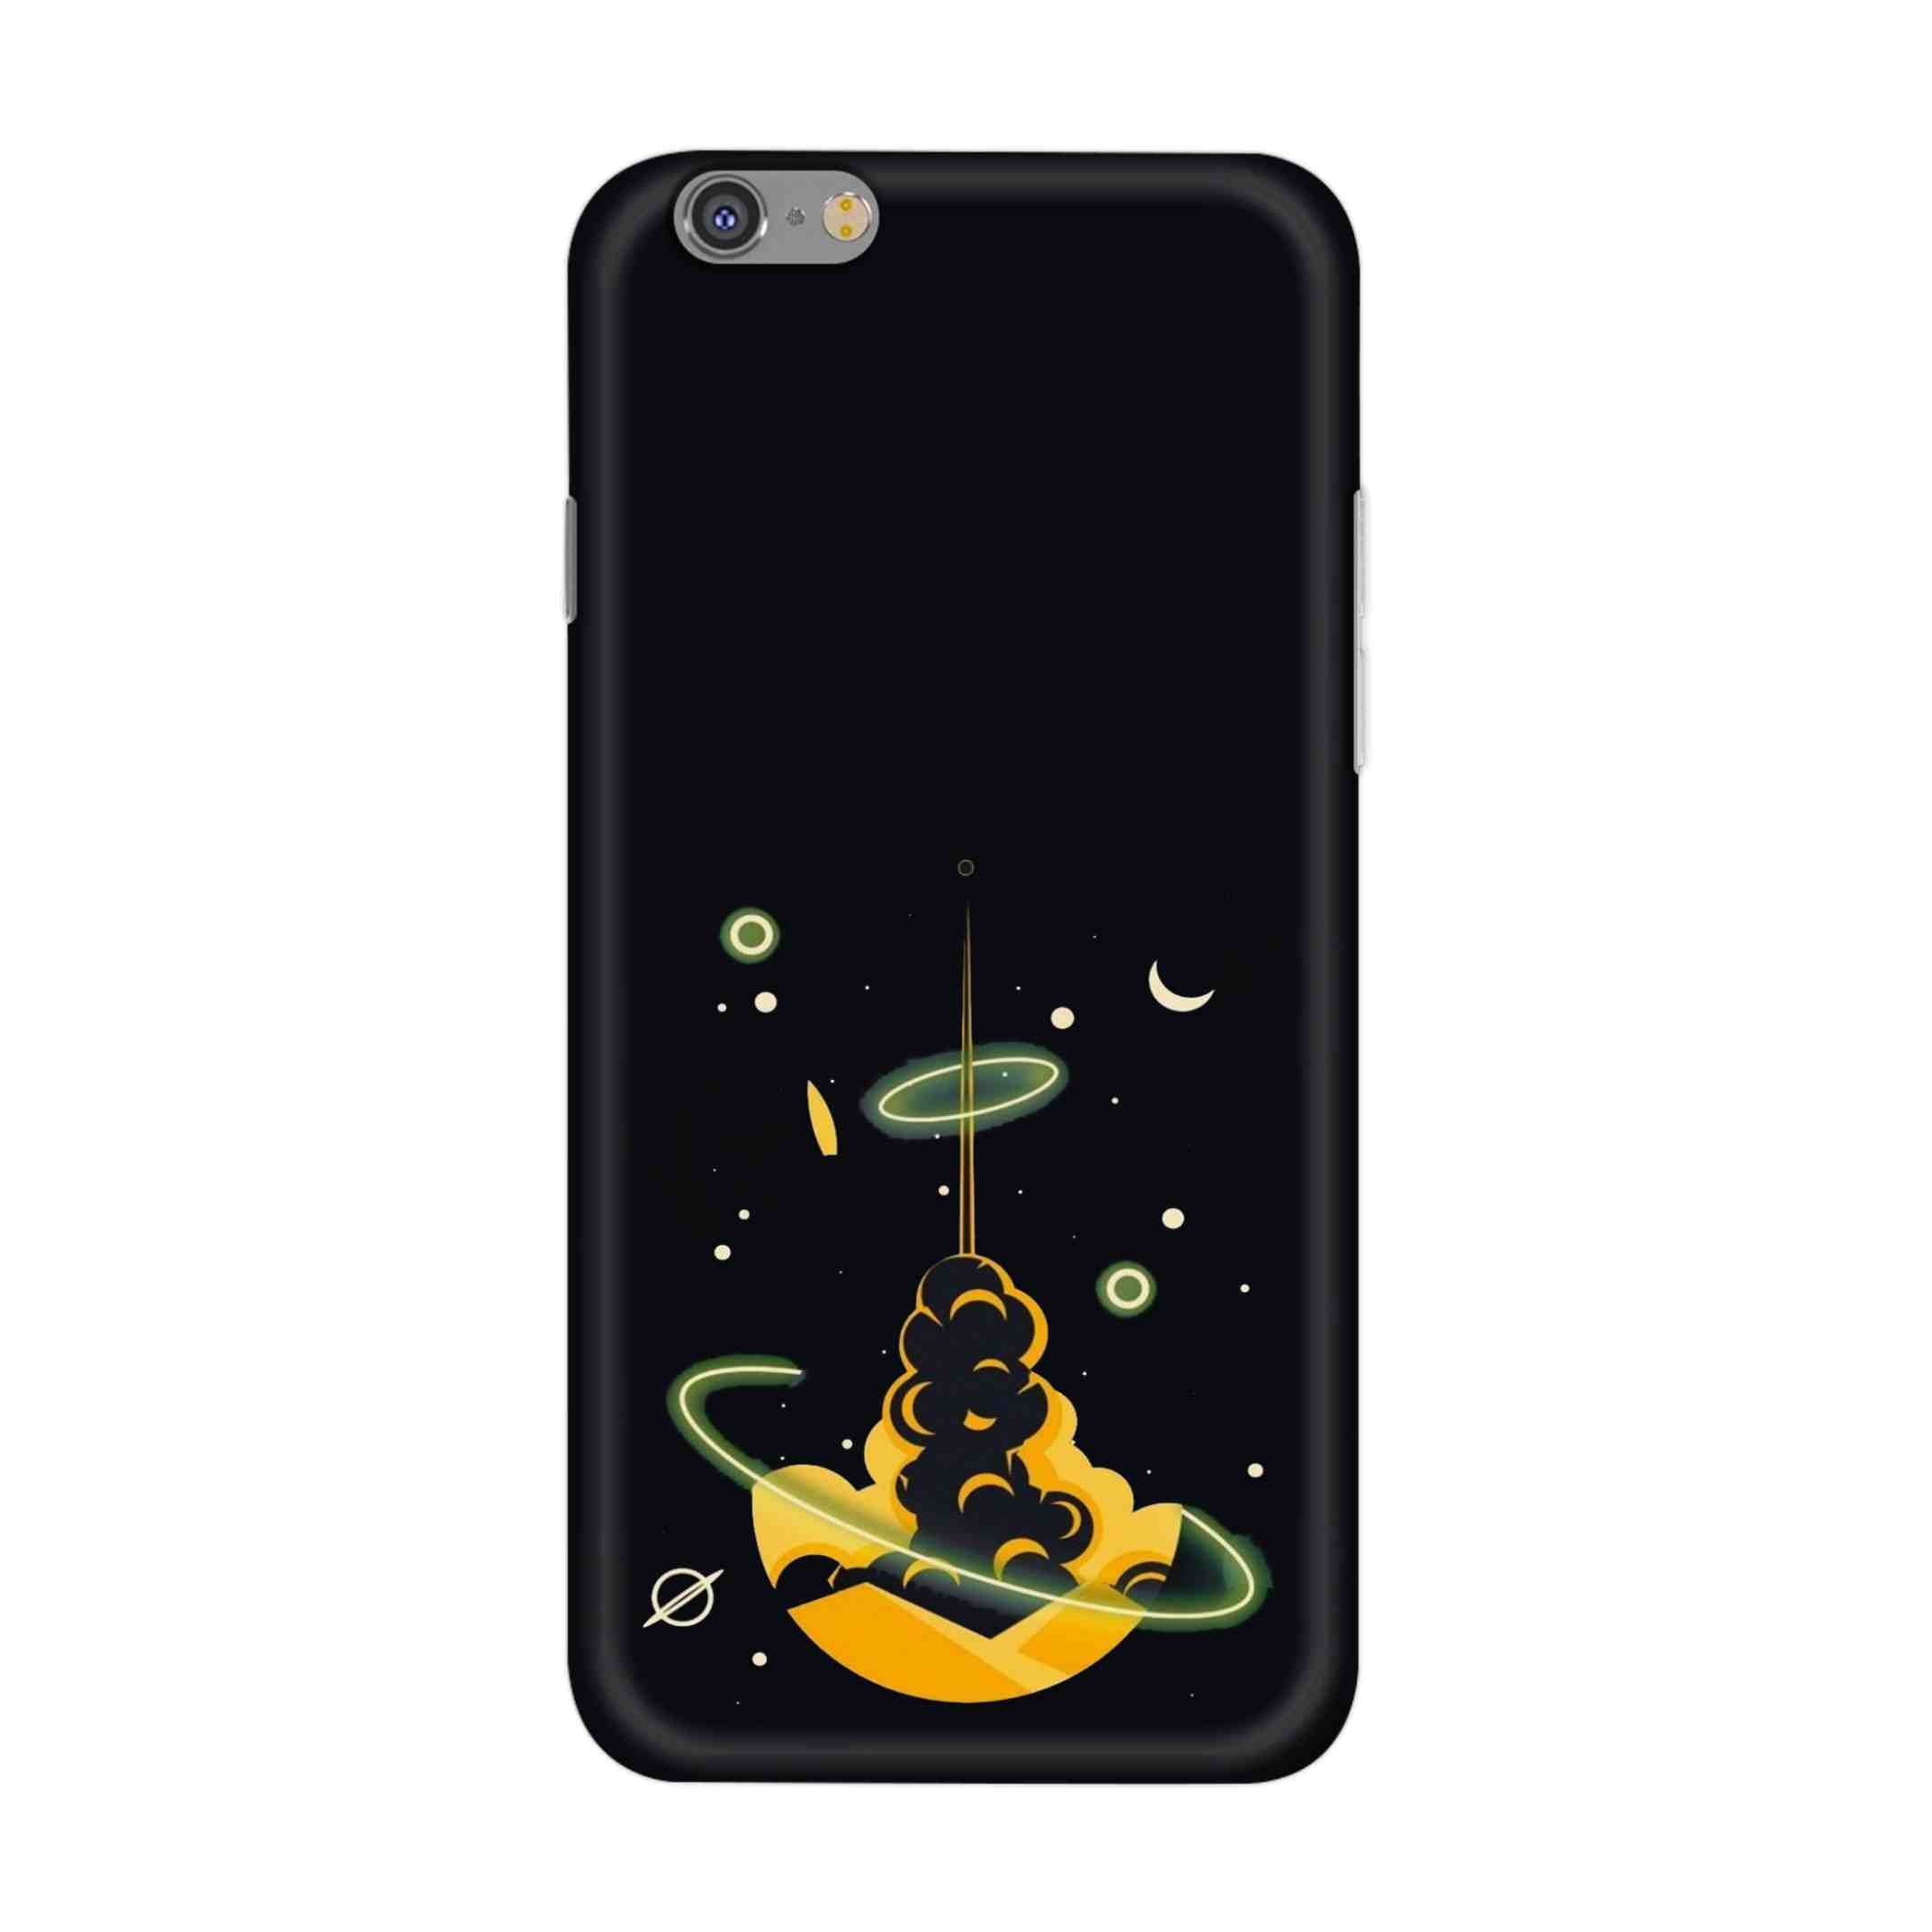 Buy Moon Hard Back Mobile Phone Case/Cover For iPhone 6 / 6s Online